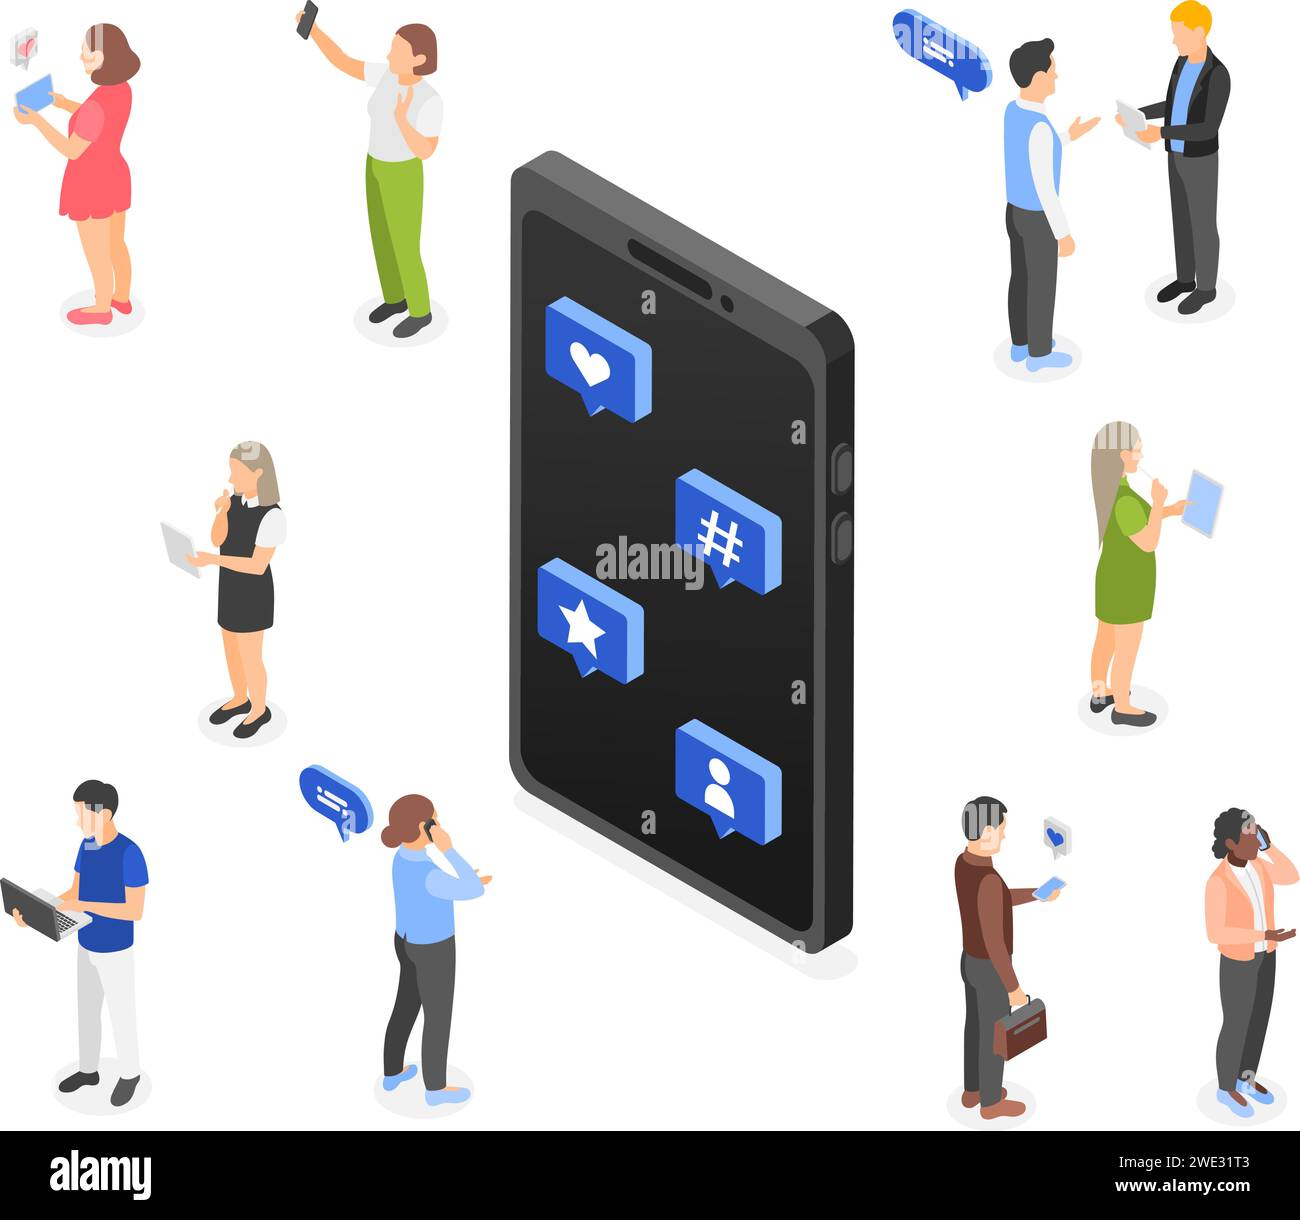 Isometric social media addiction. People crowd using gadgets, waiting likes and comments from online friends. Isolated characters and smartphone Stock Vector